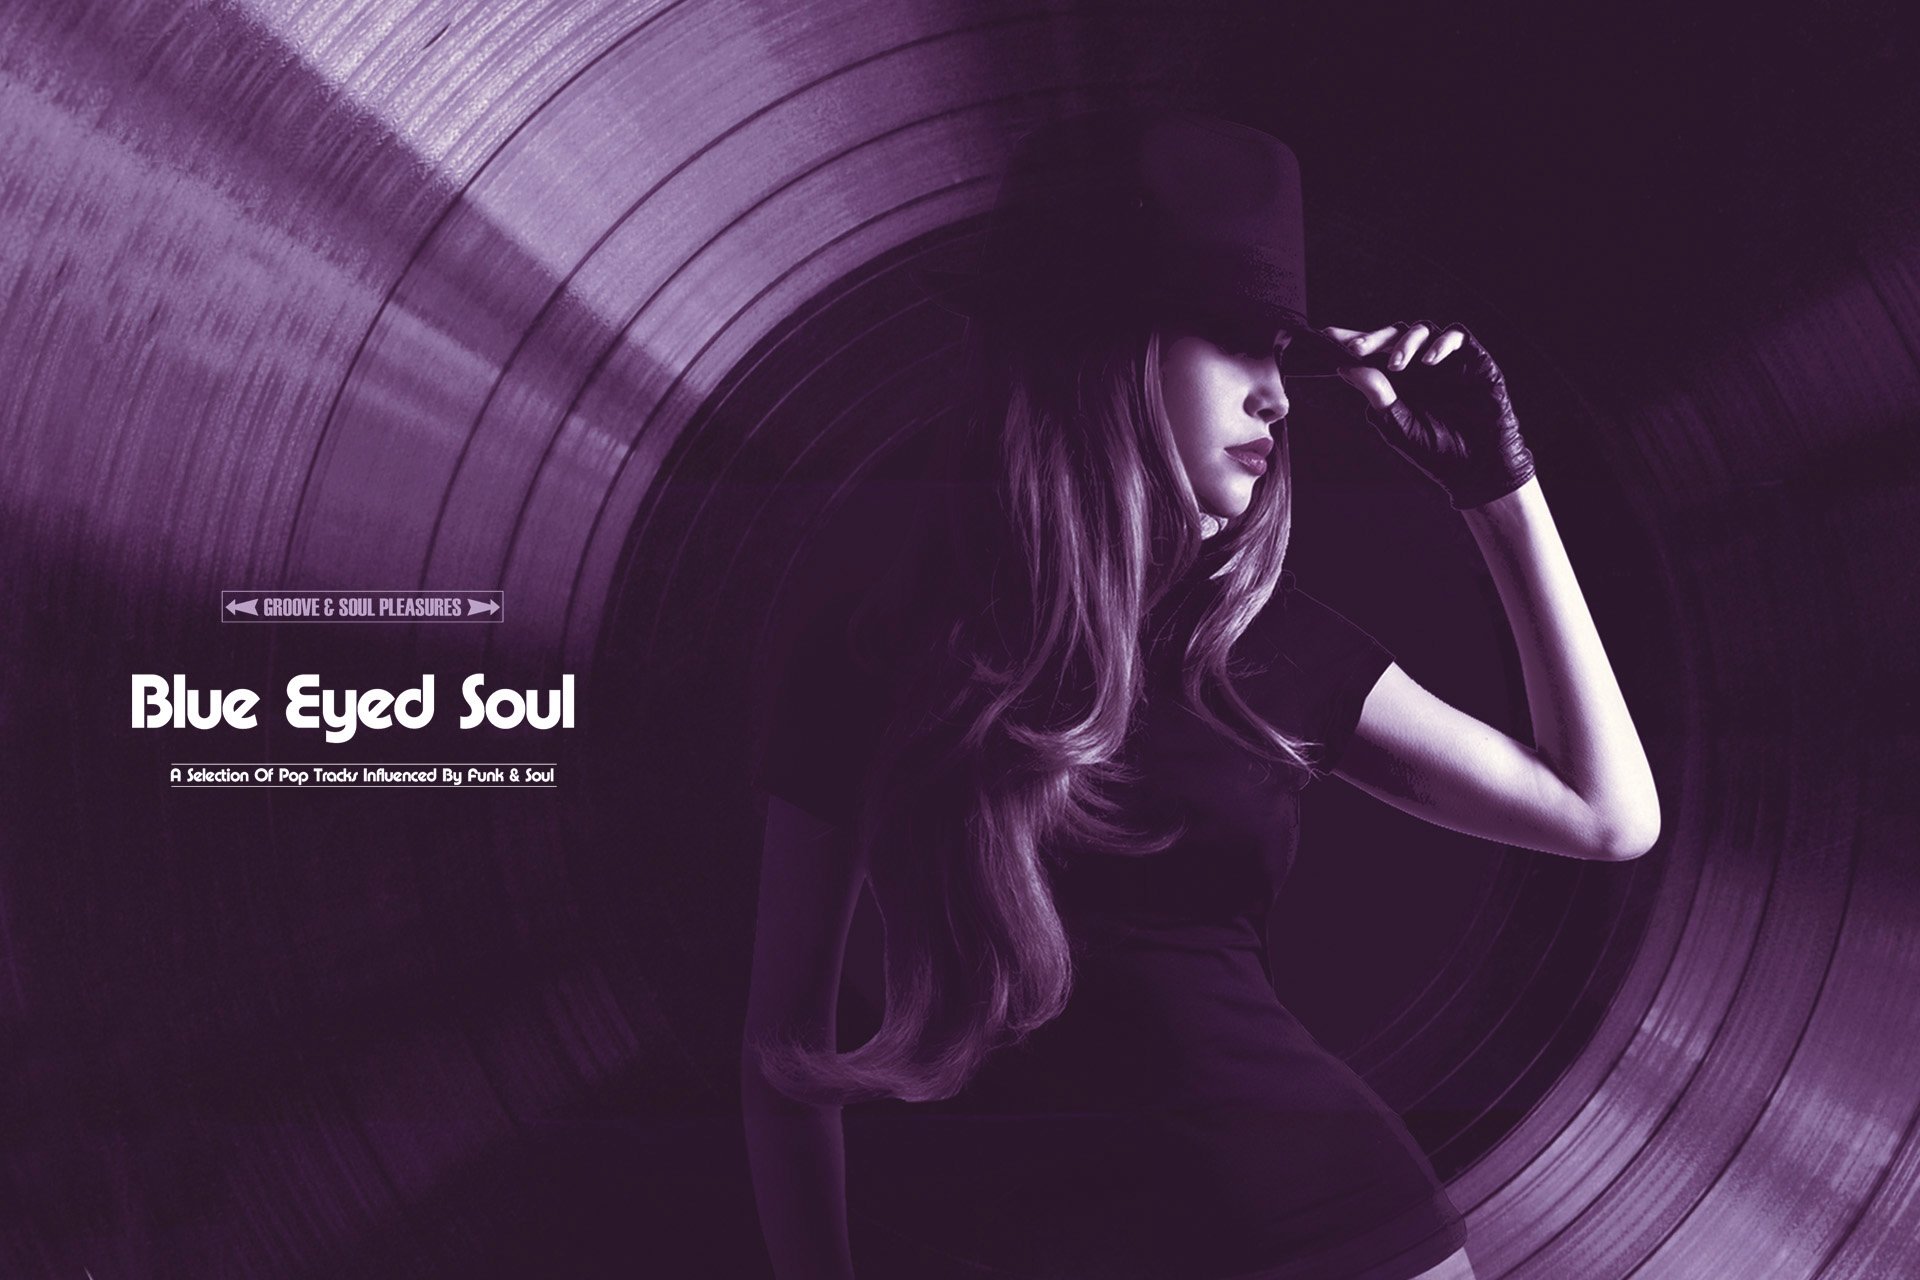 création groove and soul pleasure by Kart Gable | Graphiste Freelance